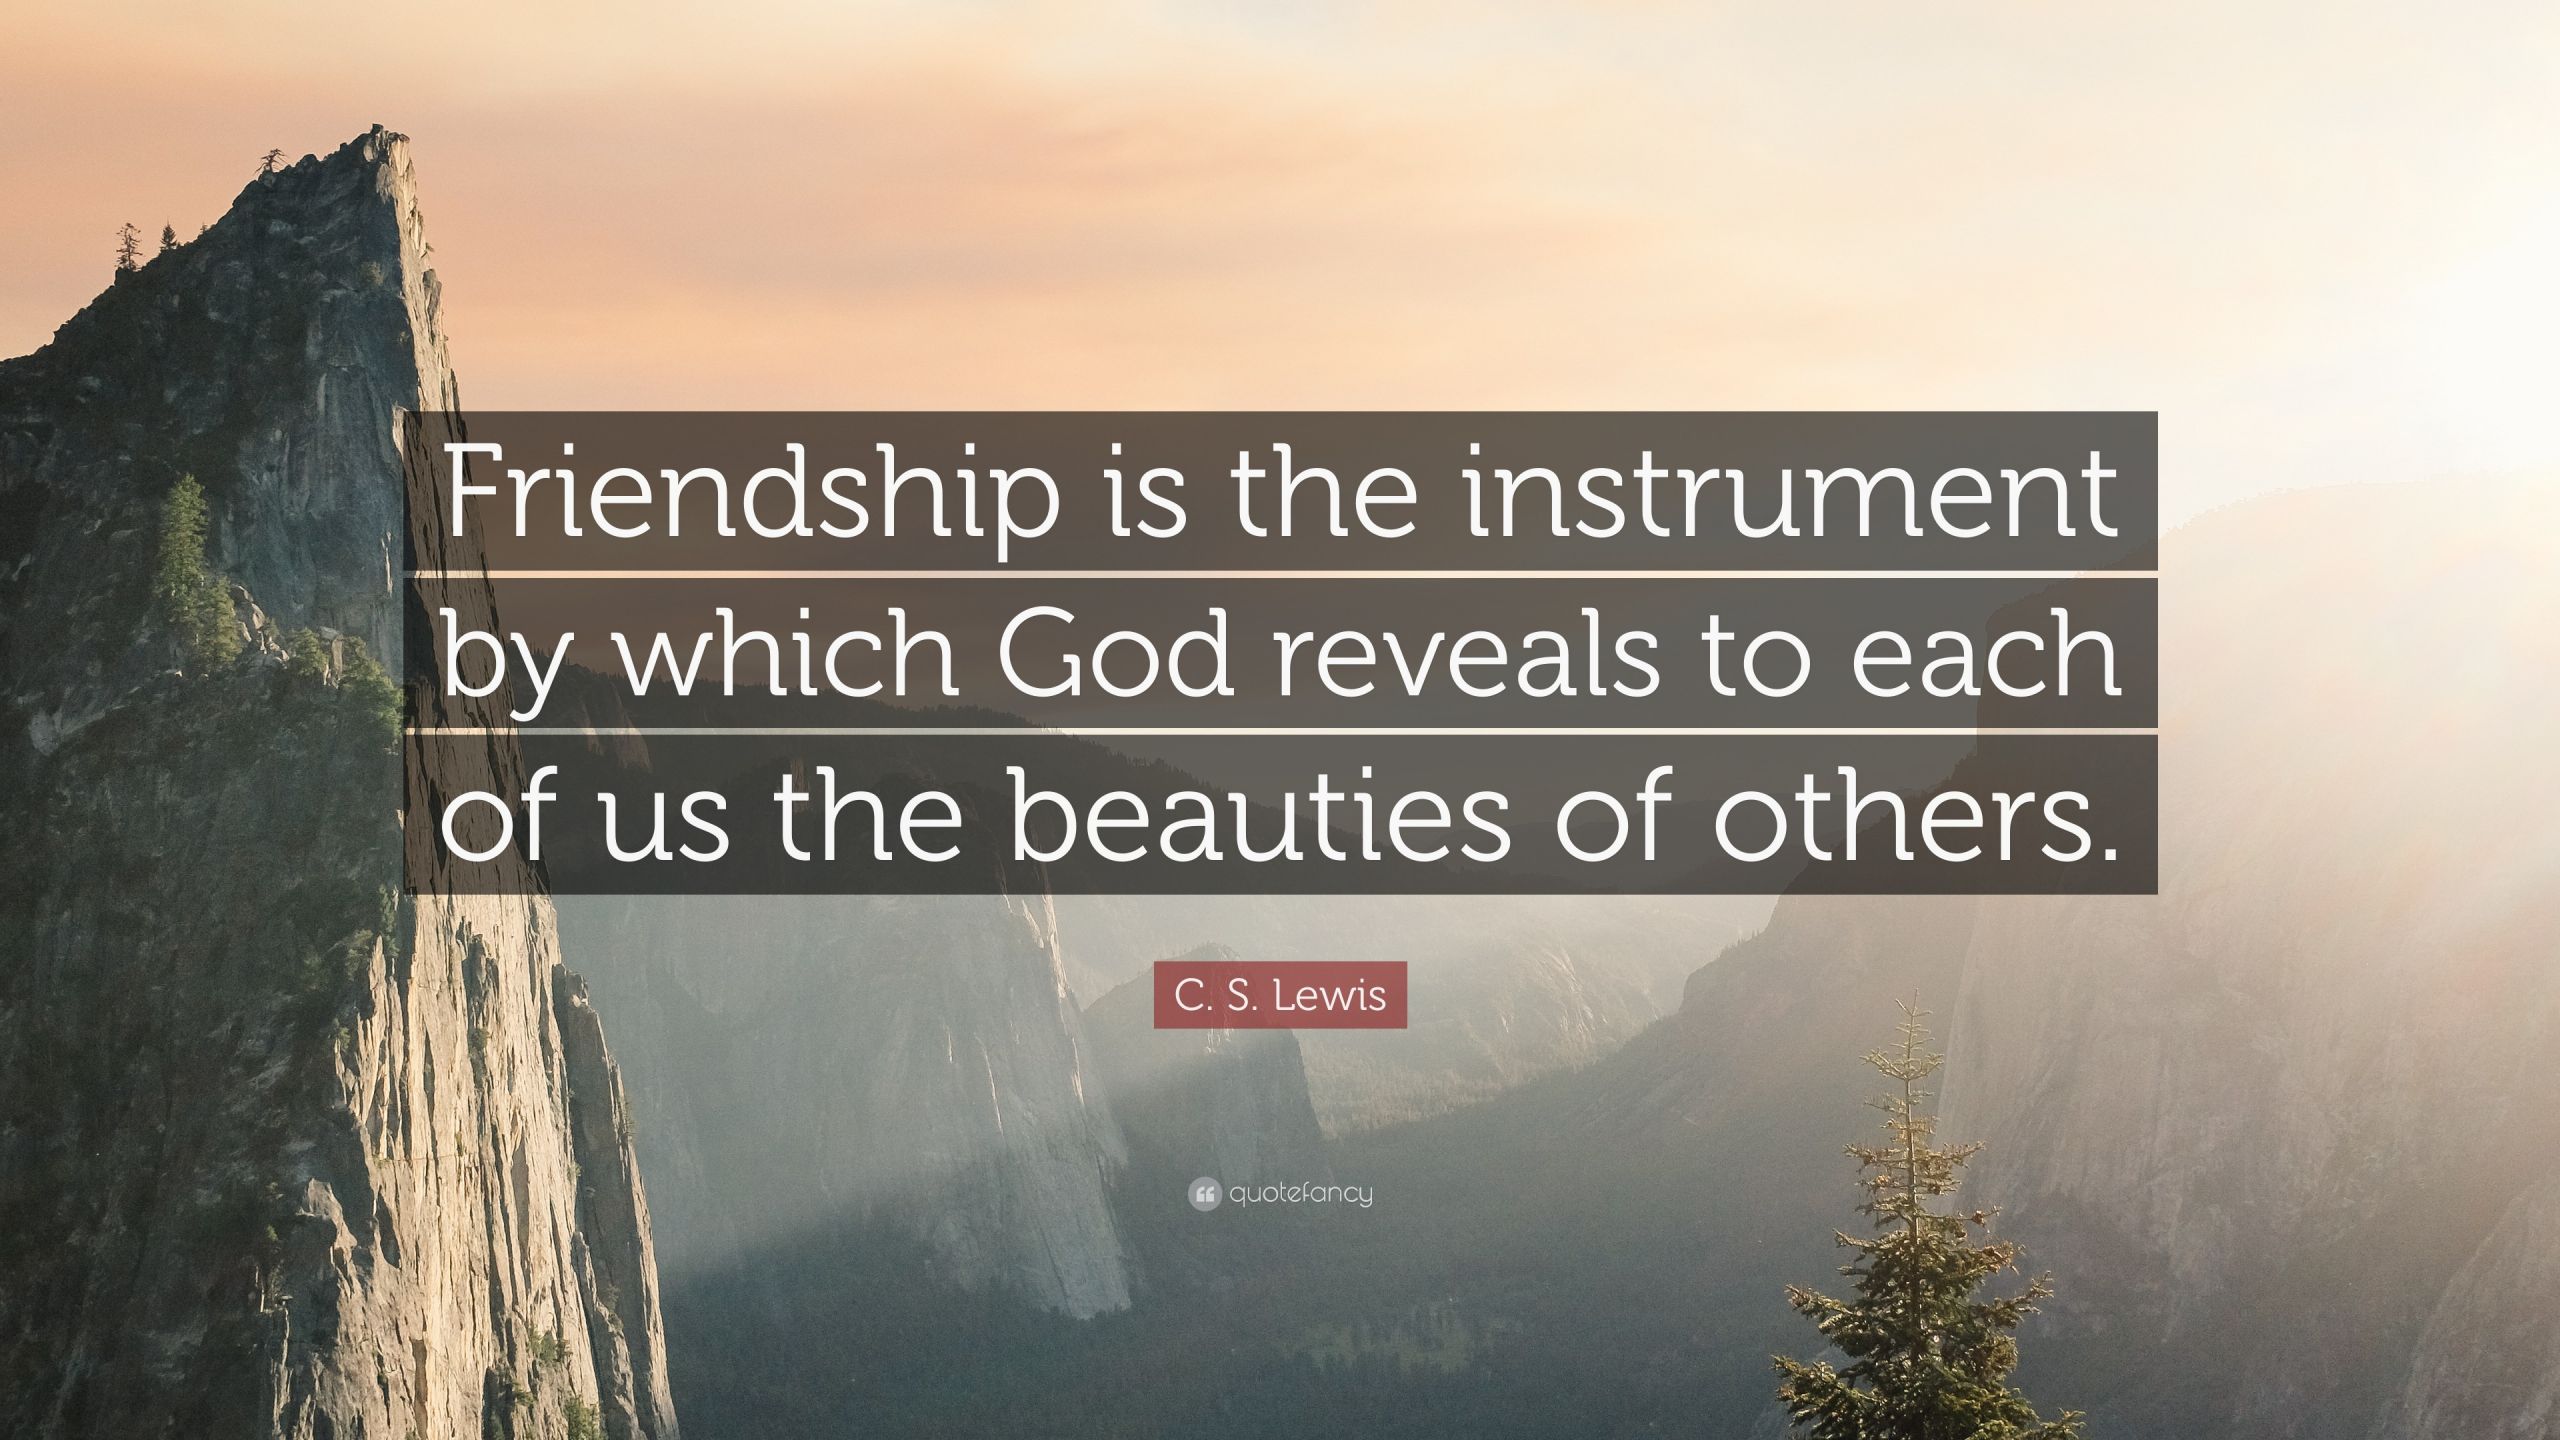 Cs Lewis Friendship Quote
 C S Lewis Quote “Friendship is the instrument by which